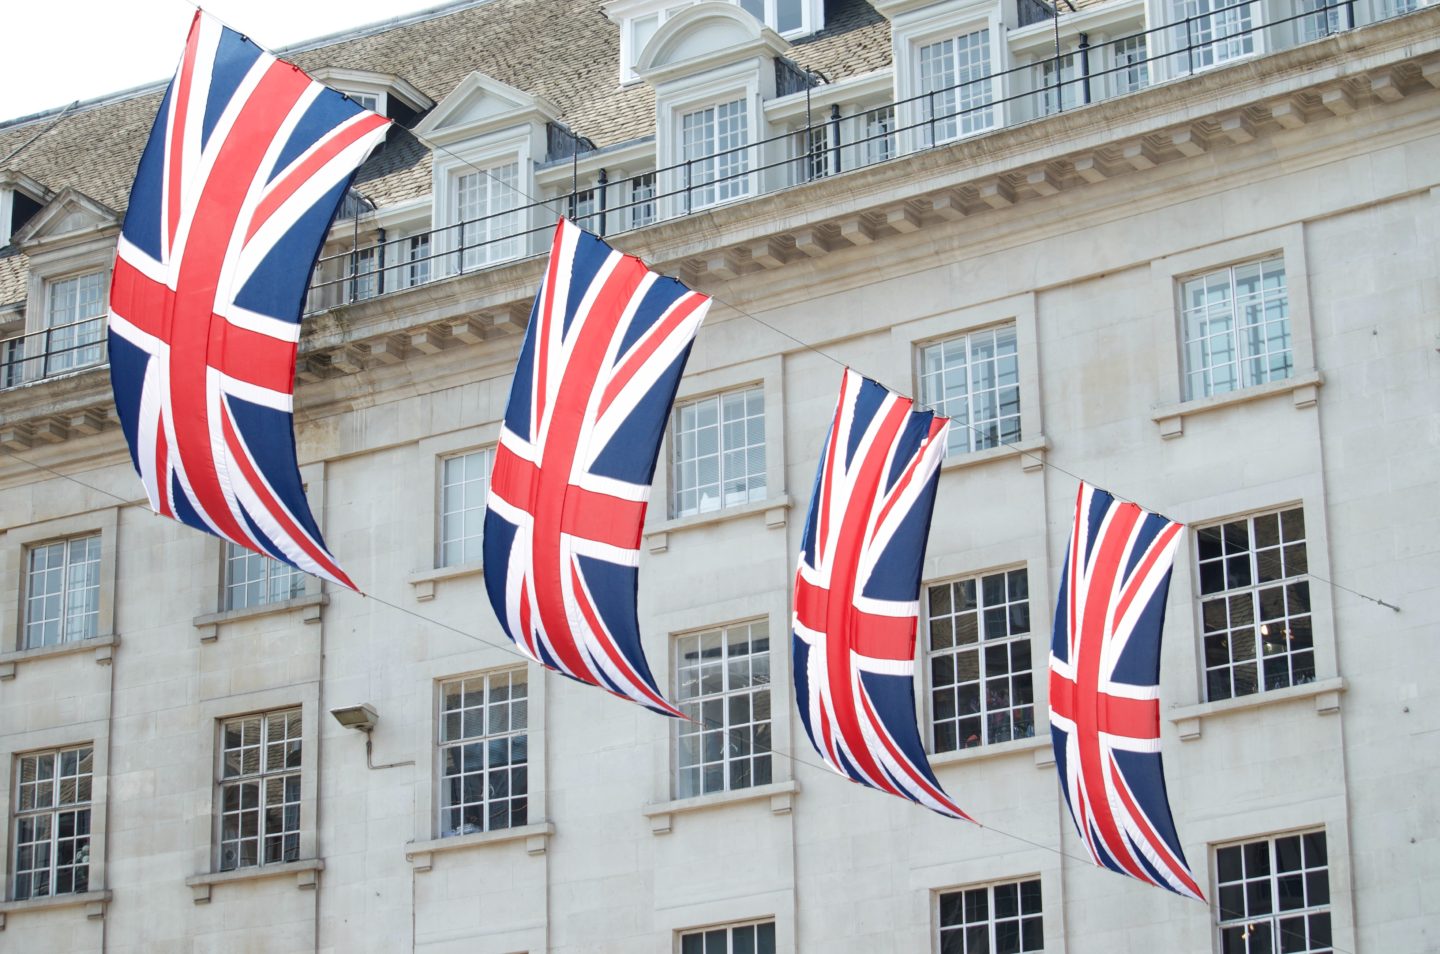 8 Things You Can Do as an Exchange Student in England